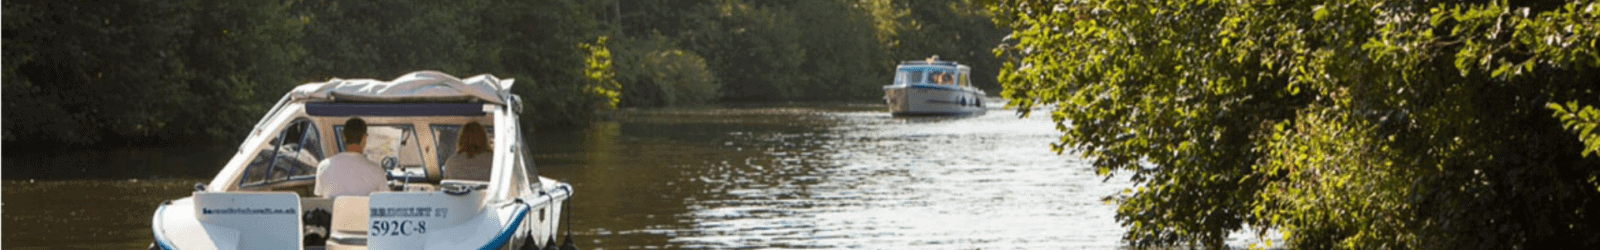 Norfolk Broads Holiday Boats for 2 People